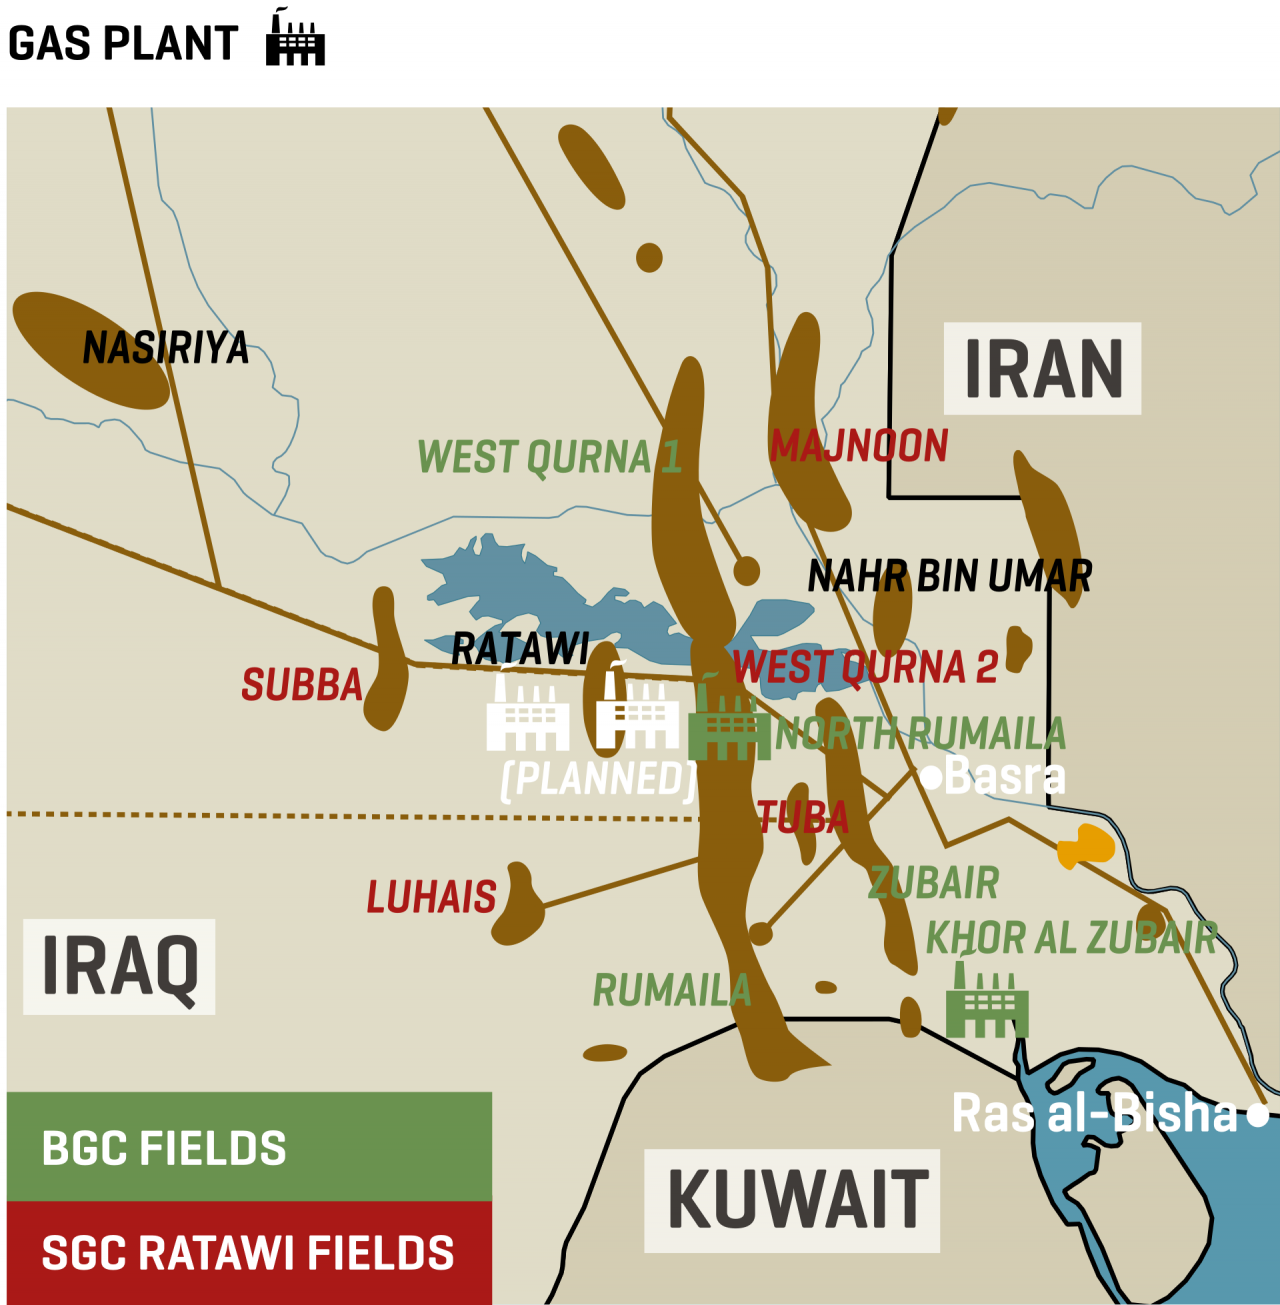 Southern Iraq: Oil Fields & Gas Processing